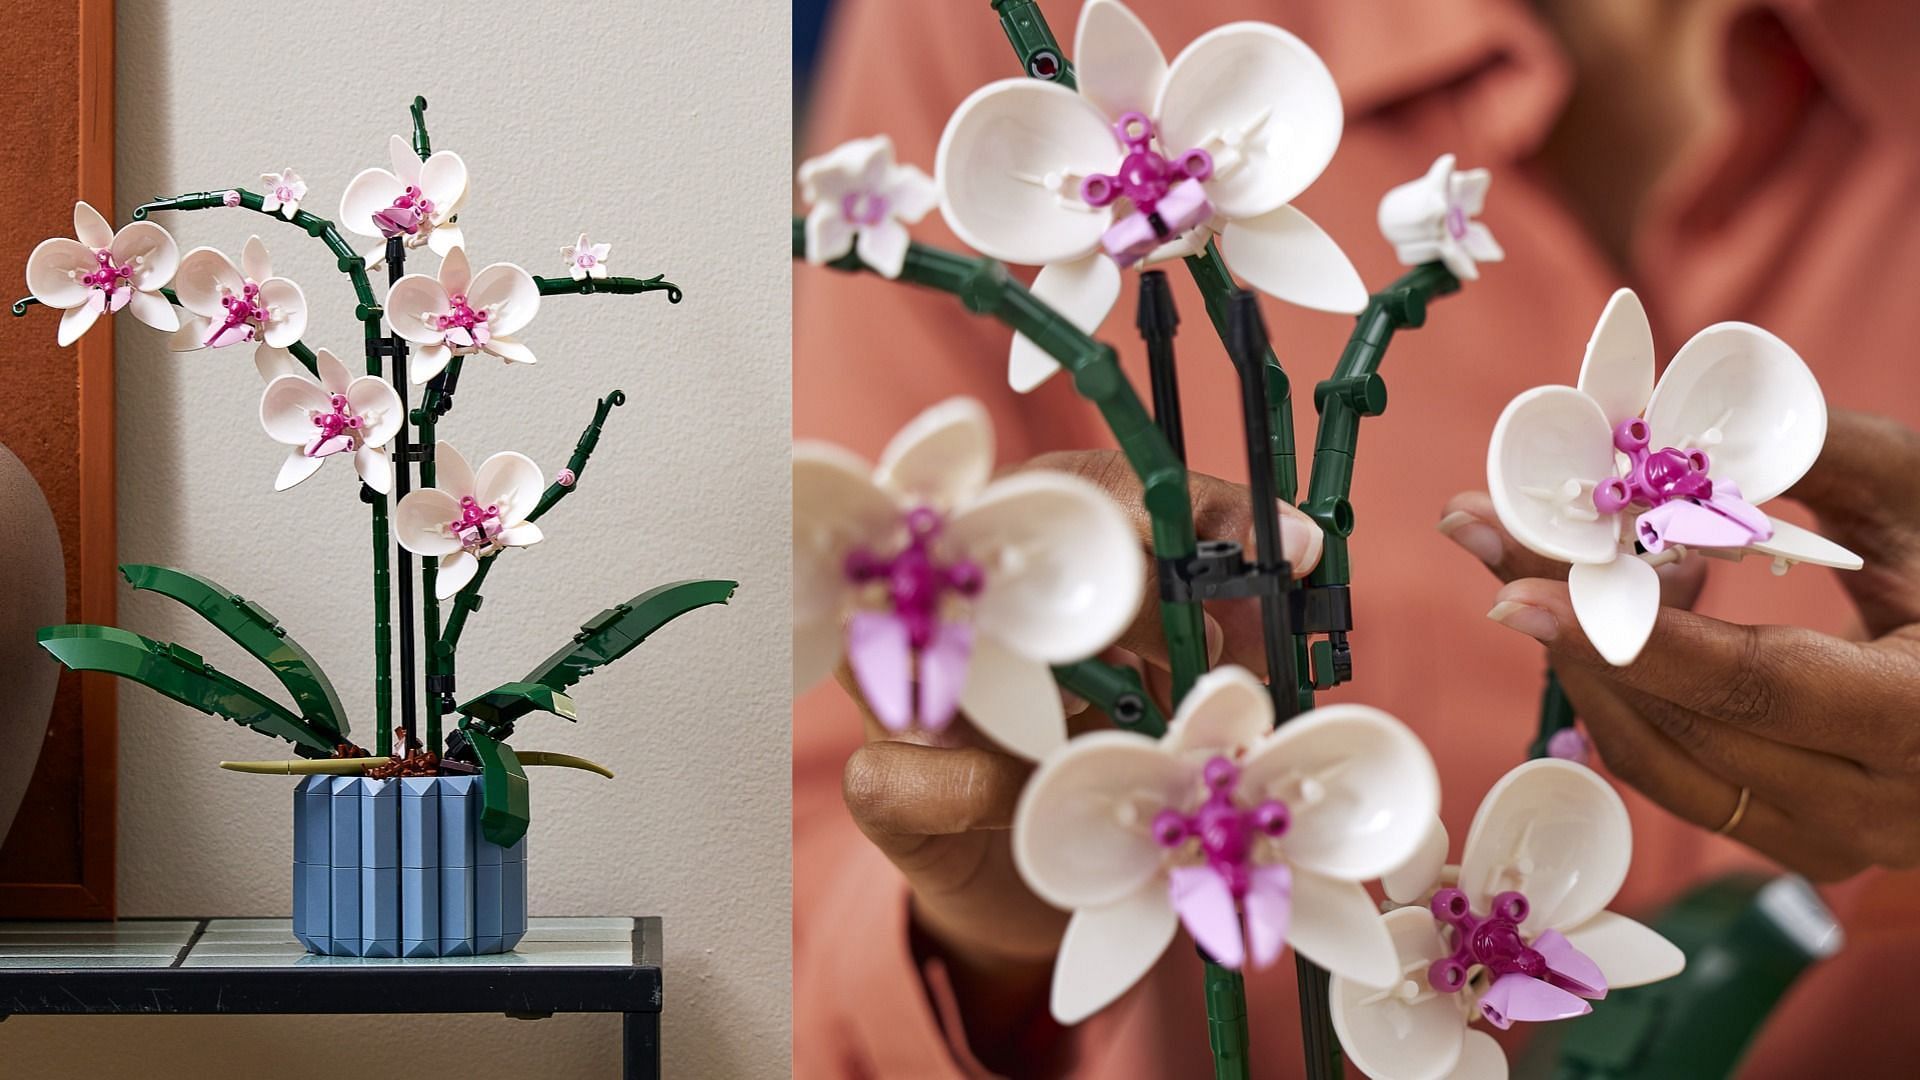 The Orchid Set recreates a realistic blooming orchid (Image via brand)